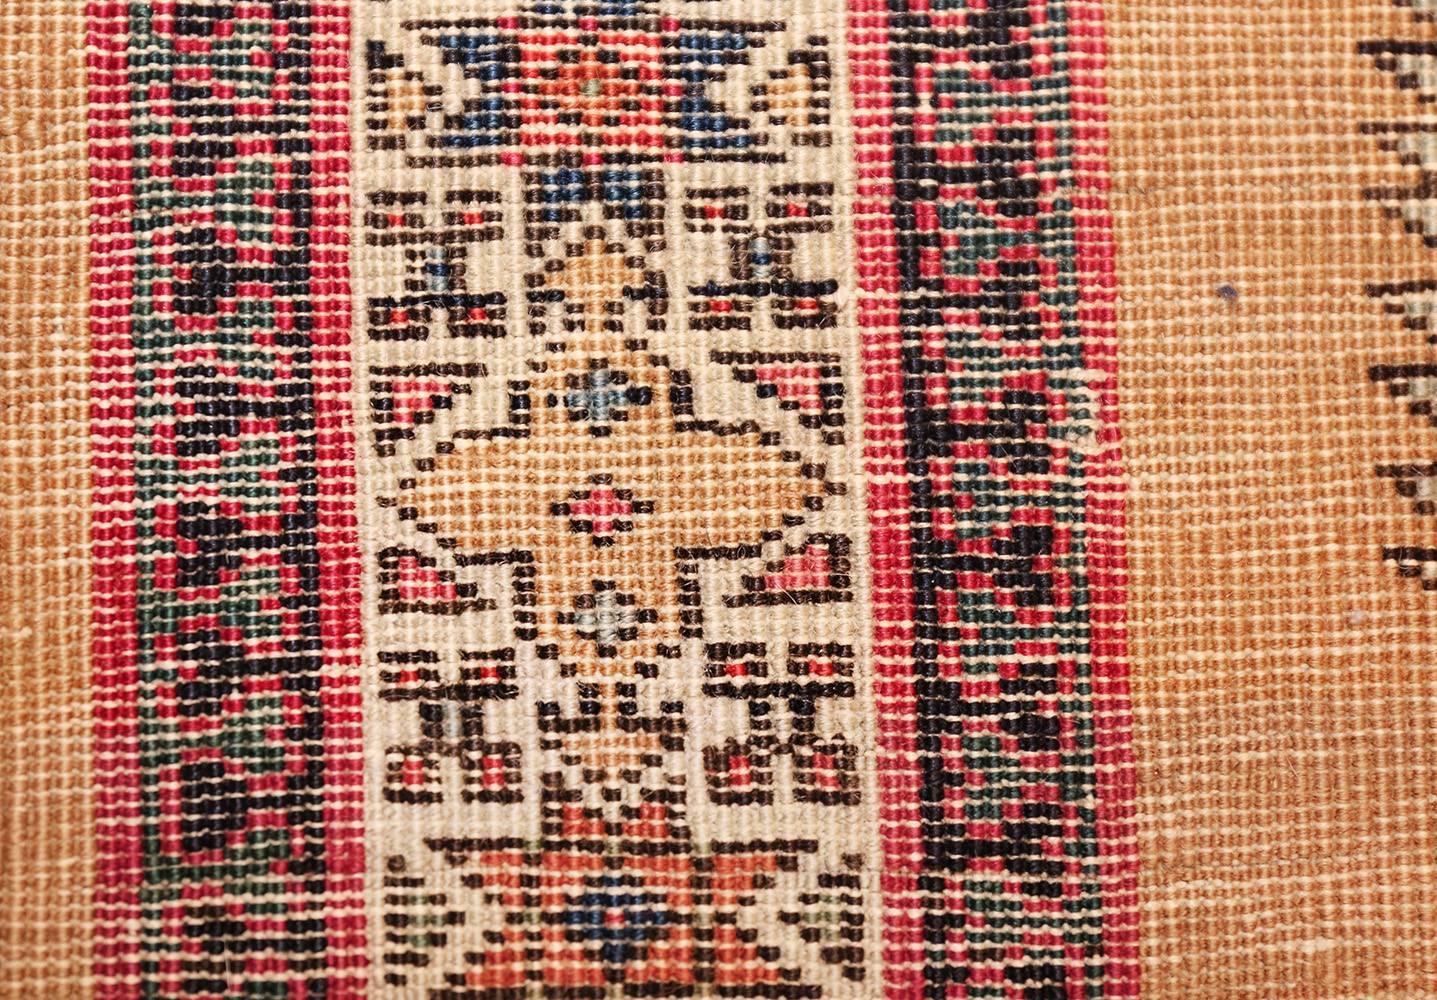 Beautiful Antique Karabagh Caucasian Rug, Country of Origin / Rug Type: Caucasian Rug, Circa Date: 1900 

Bold color, rich detail, and magnificent artistry define this stunning antique Karabagh Caucasian rug. Hailing from Caucasus, this beautiful